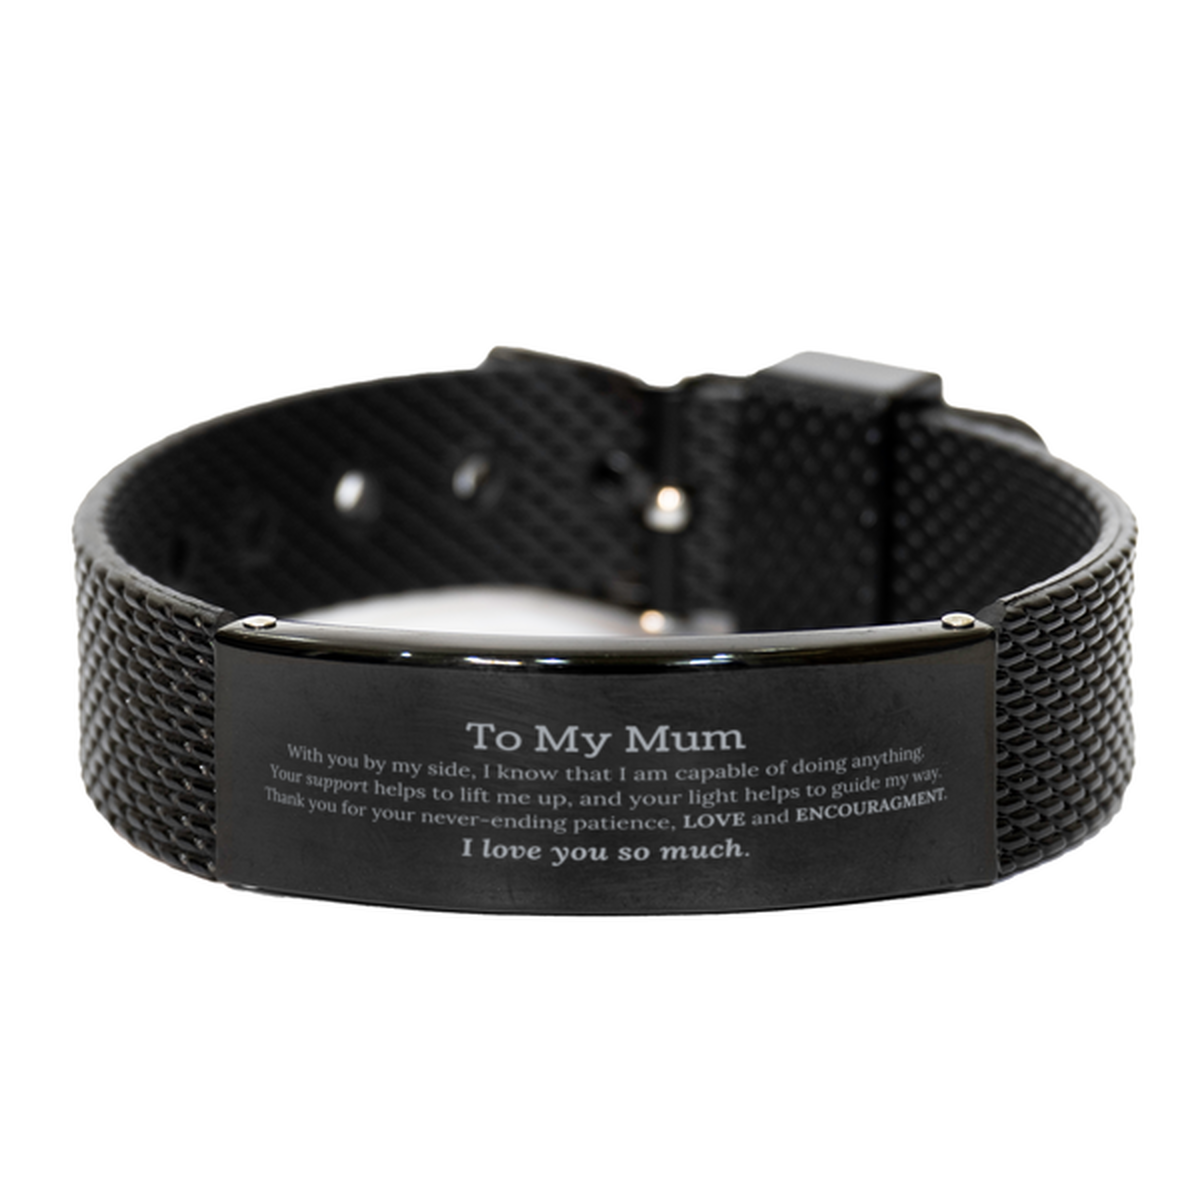 Appreciation Mum Black Shark Mesh Bracelet Gifts, To My Mum Birthday Christmas Wedding Keepsake Gifts for Mum With you by my side, I know that I am capable of doing anything. I love you so much